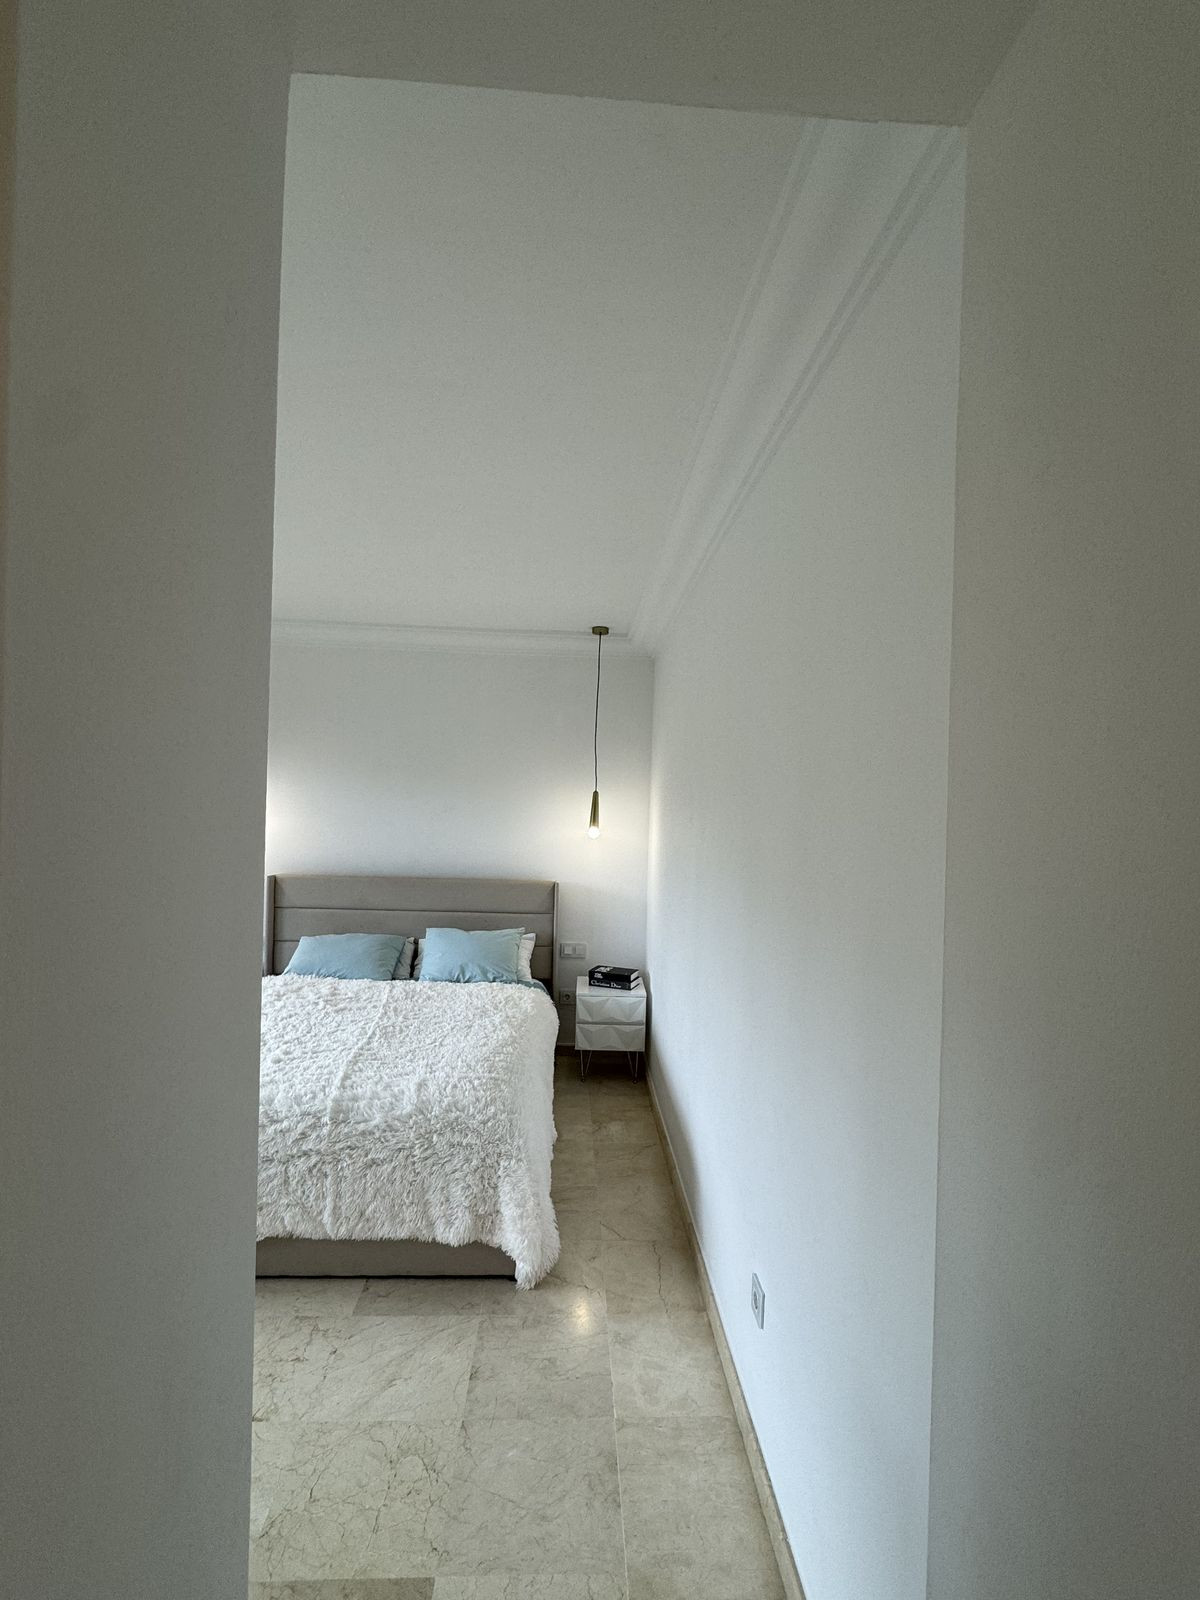 3 Bedroom Middle Floor Apartment For Sale Nueva Andalucía